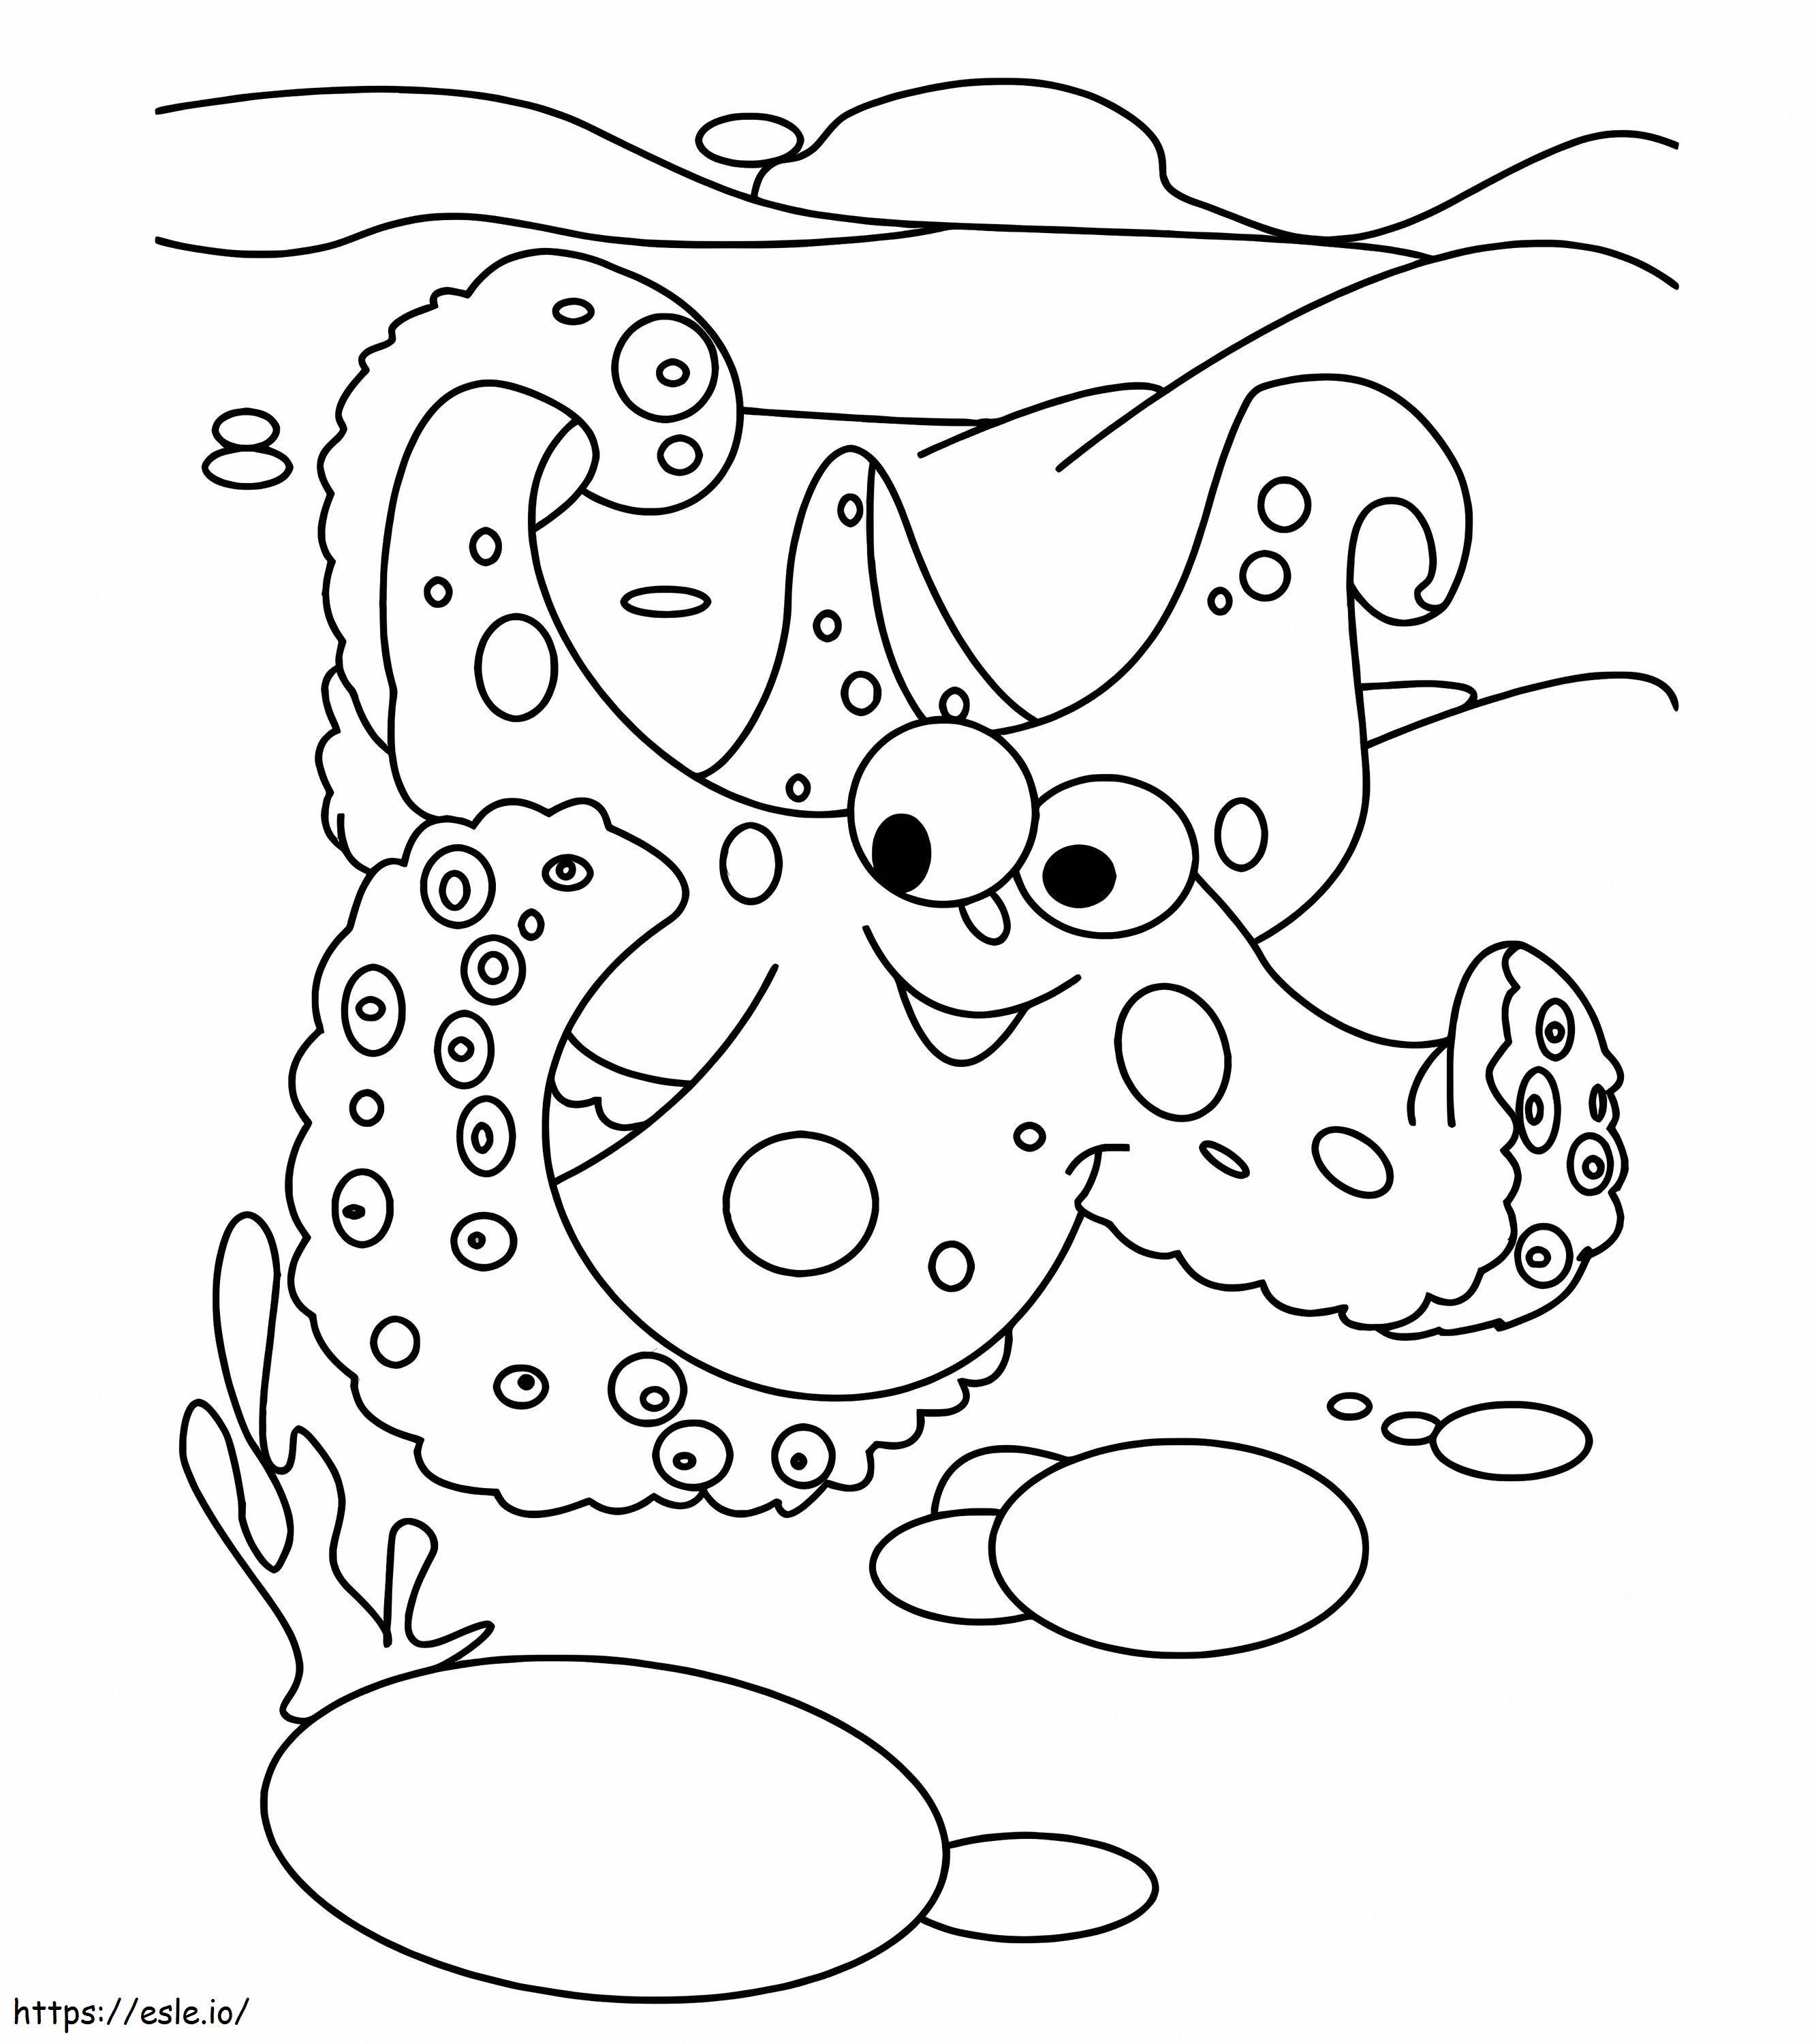 Starfish In The Sea coloring page